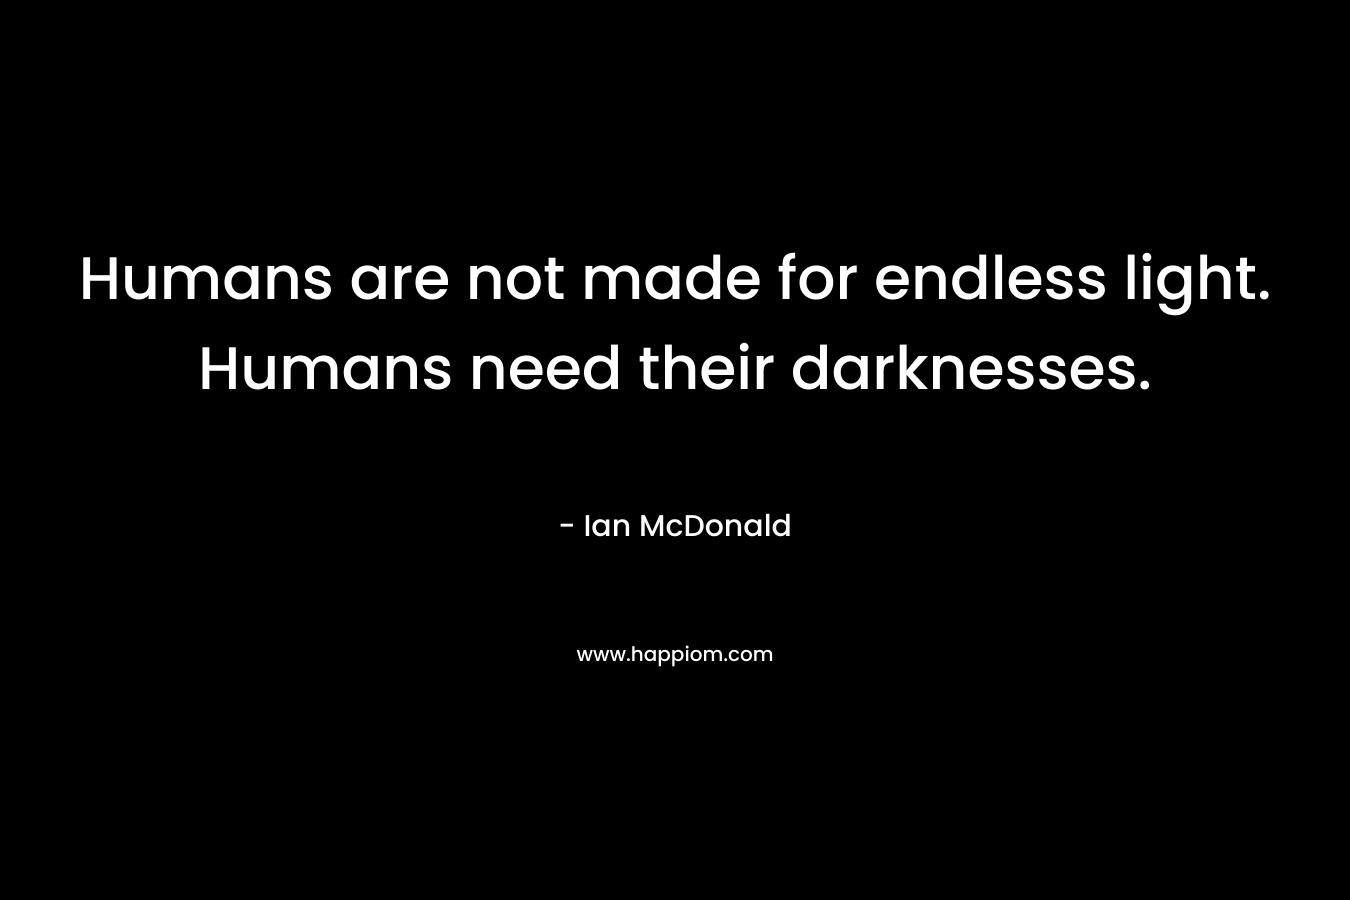 Humans are not made for endless light. Humans need their darknesses. – Ian McDonald